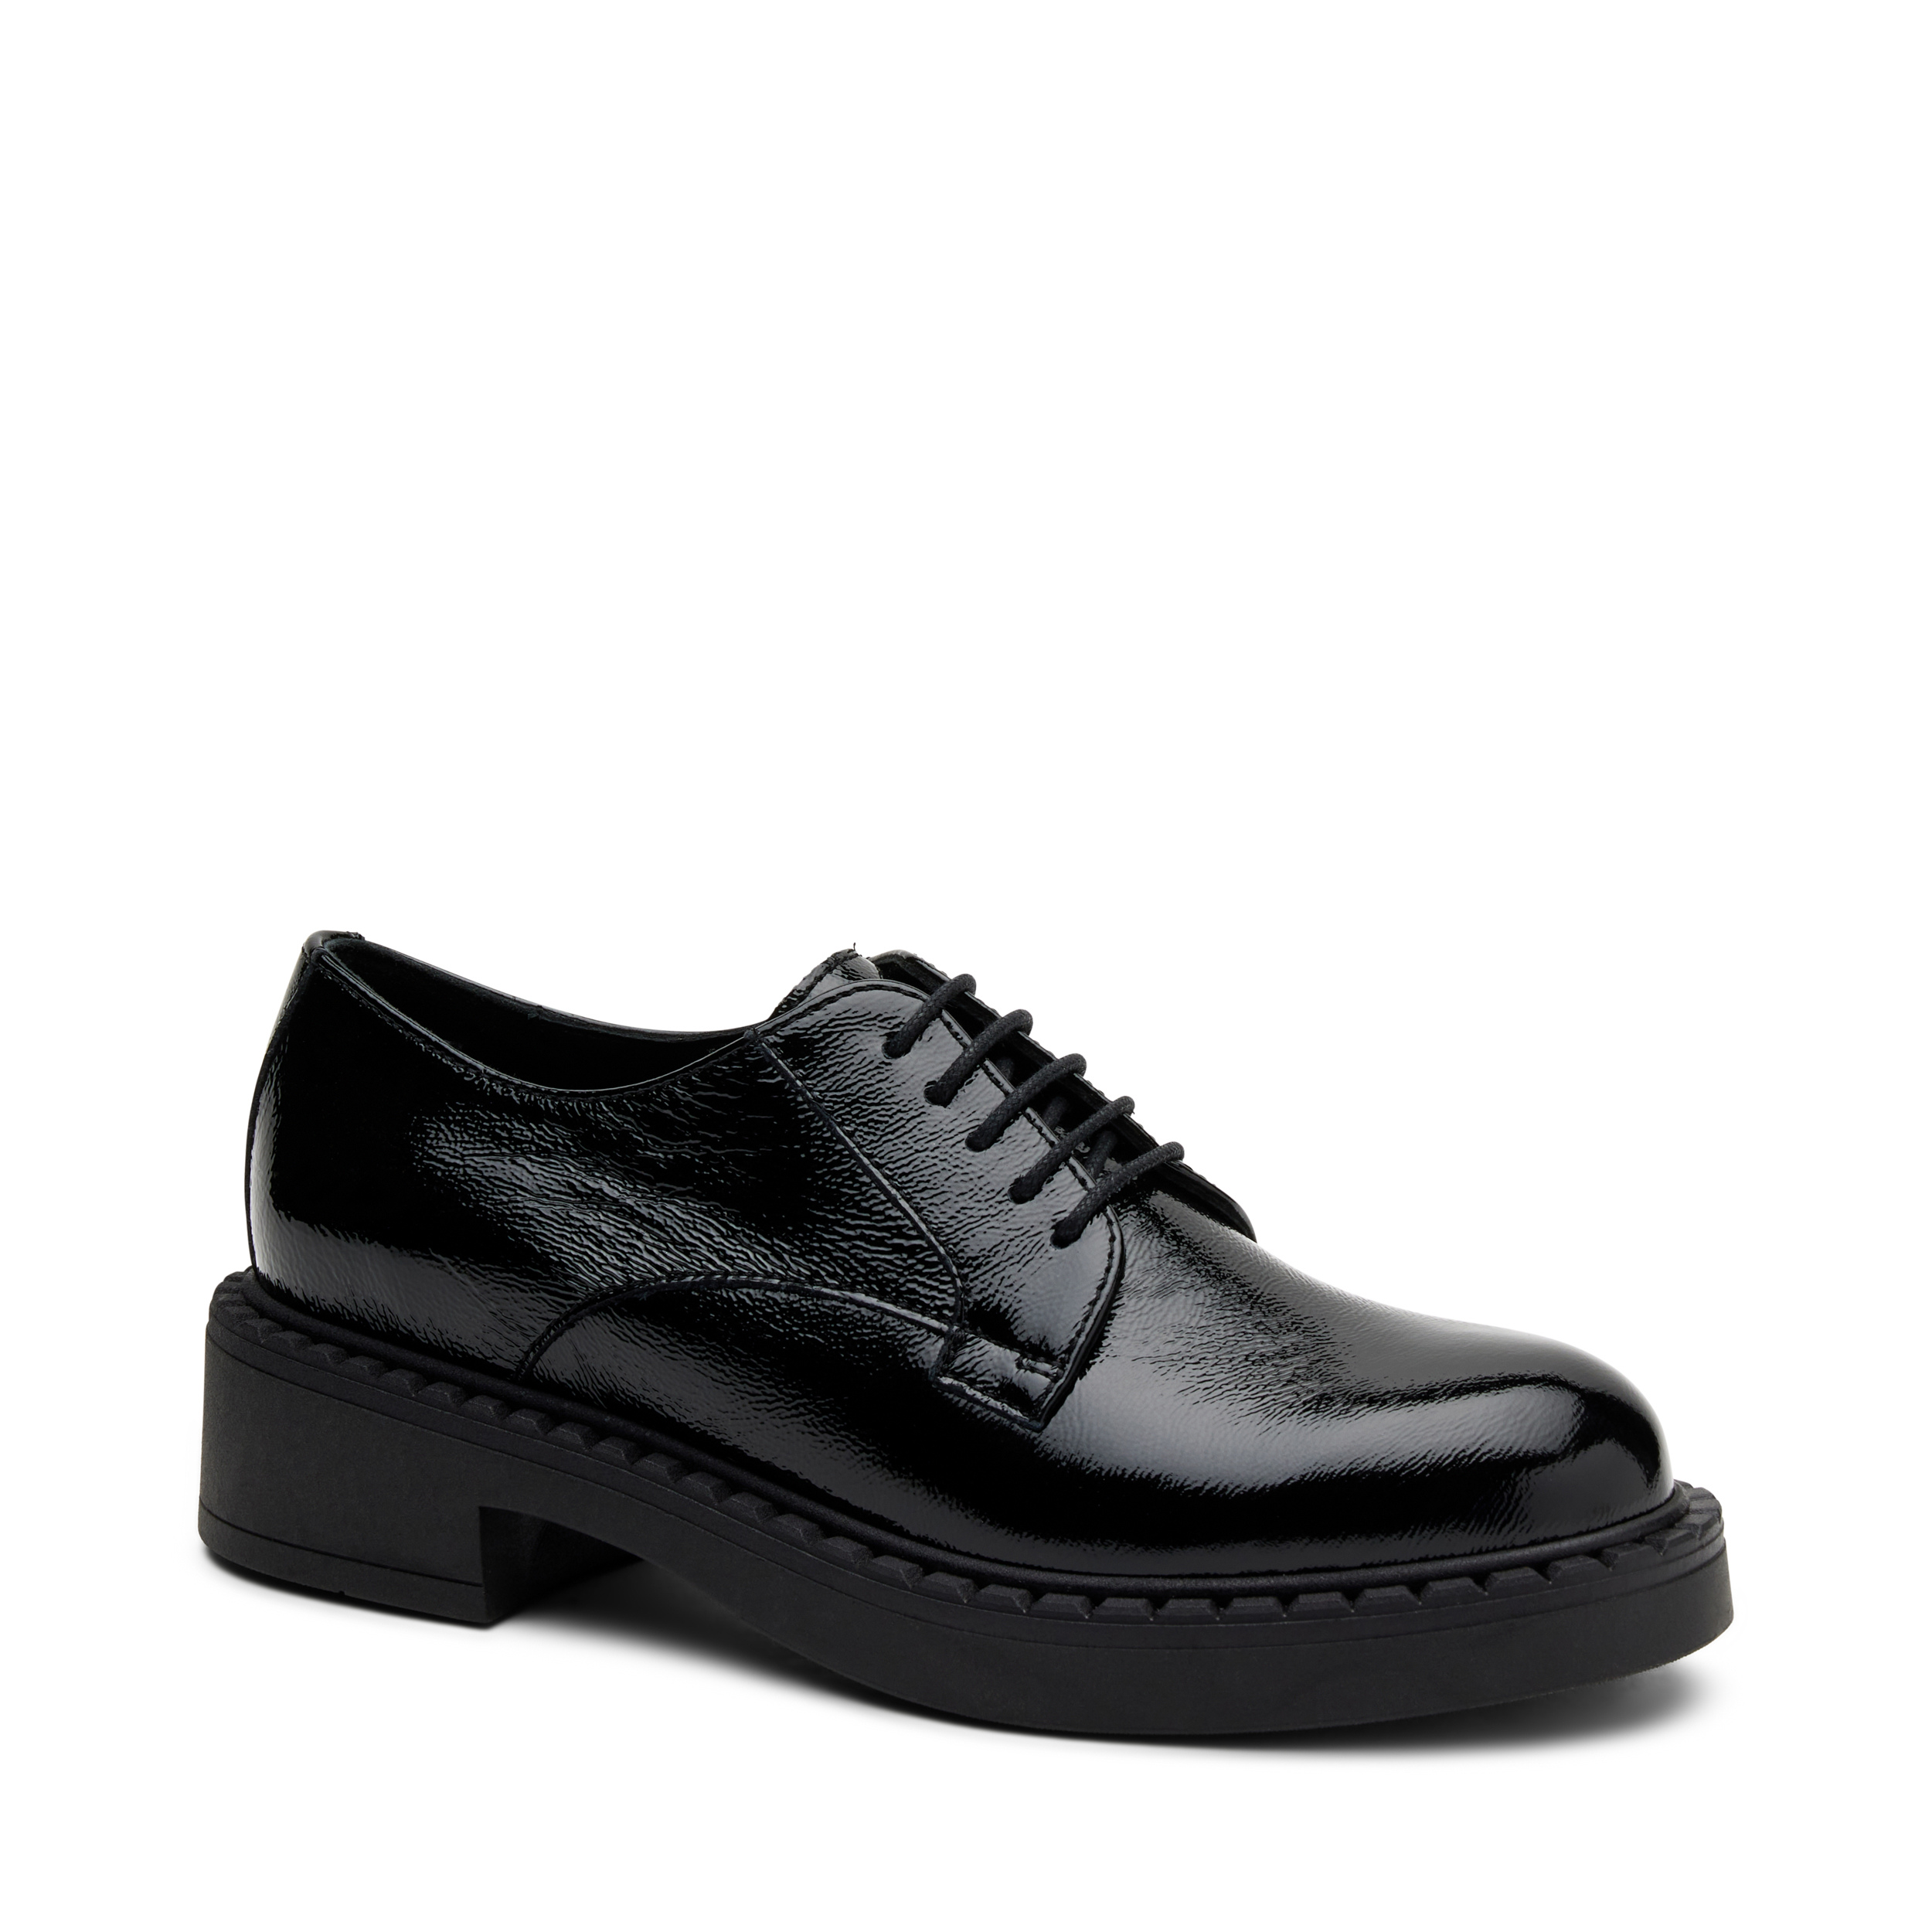 Patent leather lace-up shoes with bold sole, Col. Black | Frau